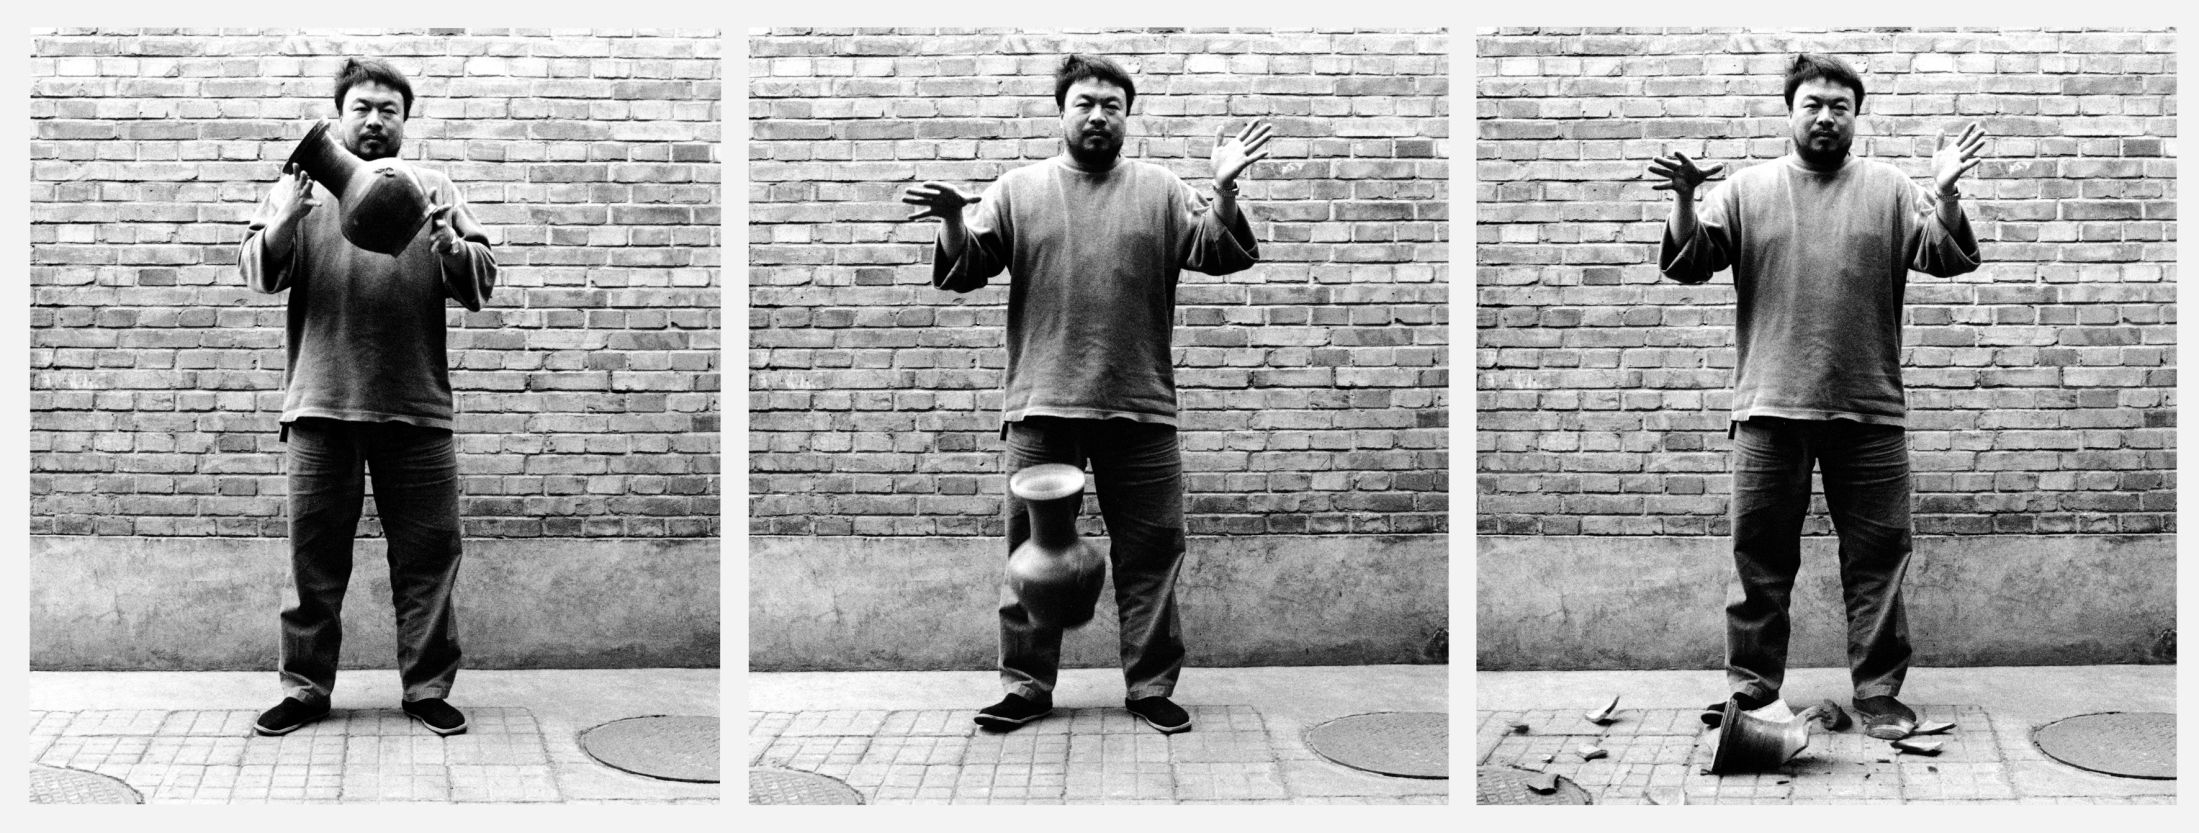 Ai Weiwei, Dropping a Han Dynasty Urn, 1995, courtesy of the artist, private collection